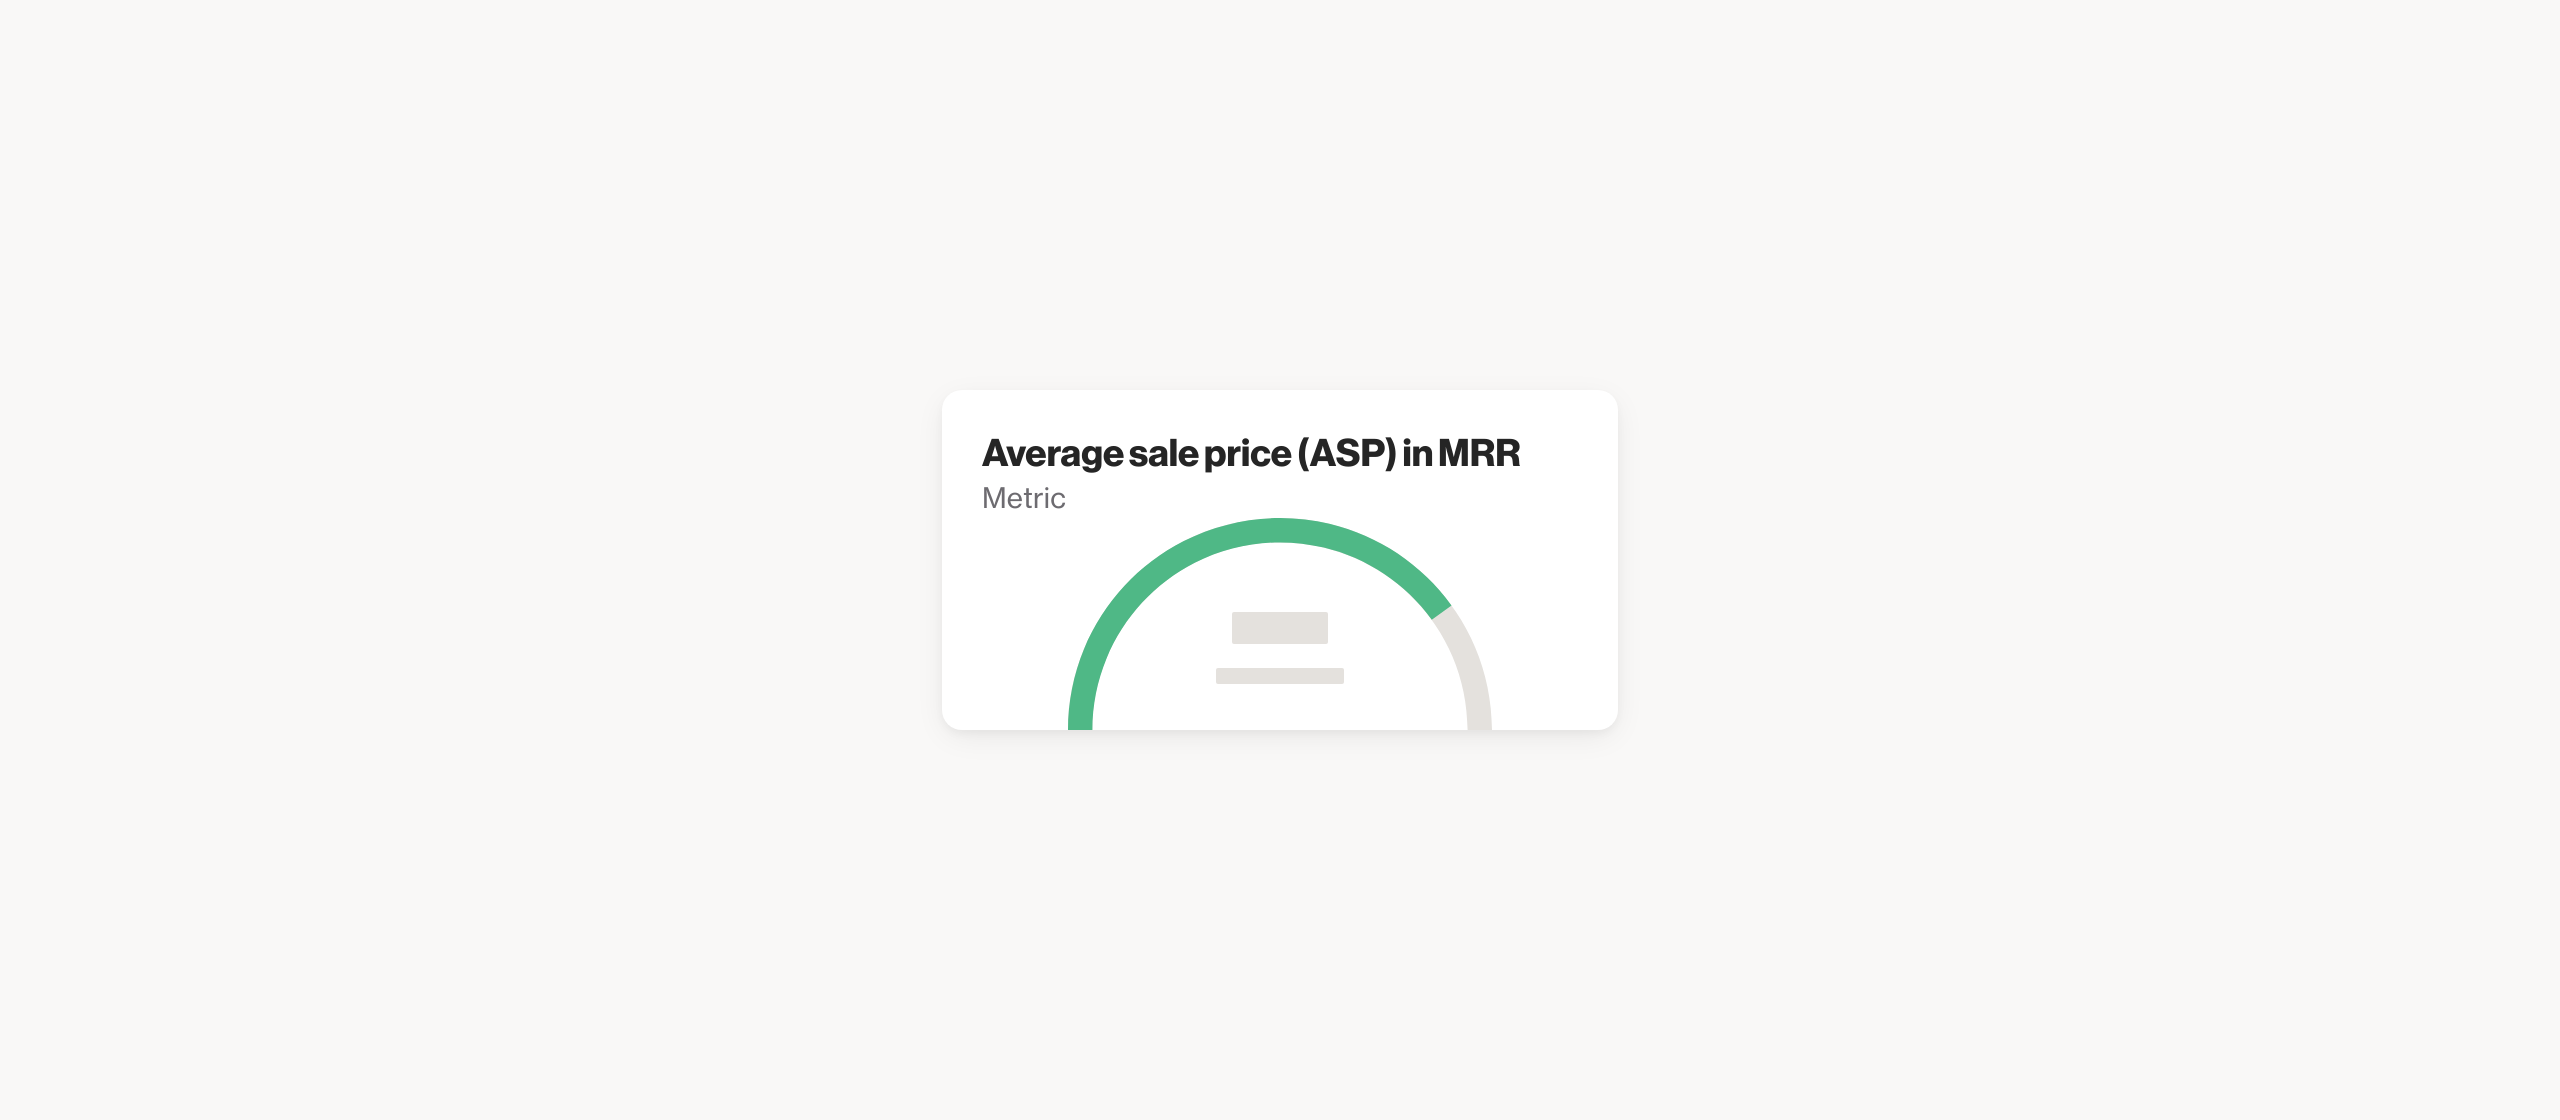 Chargebee average sale price (ASP) in MRR